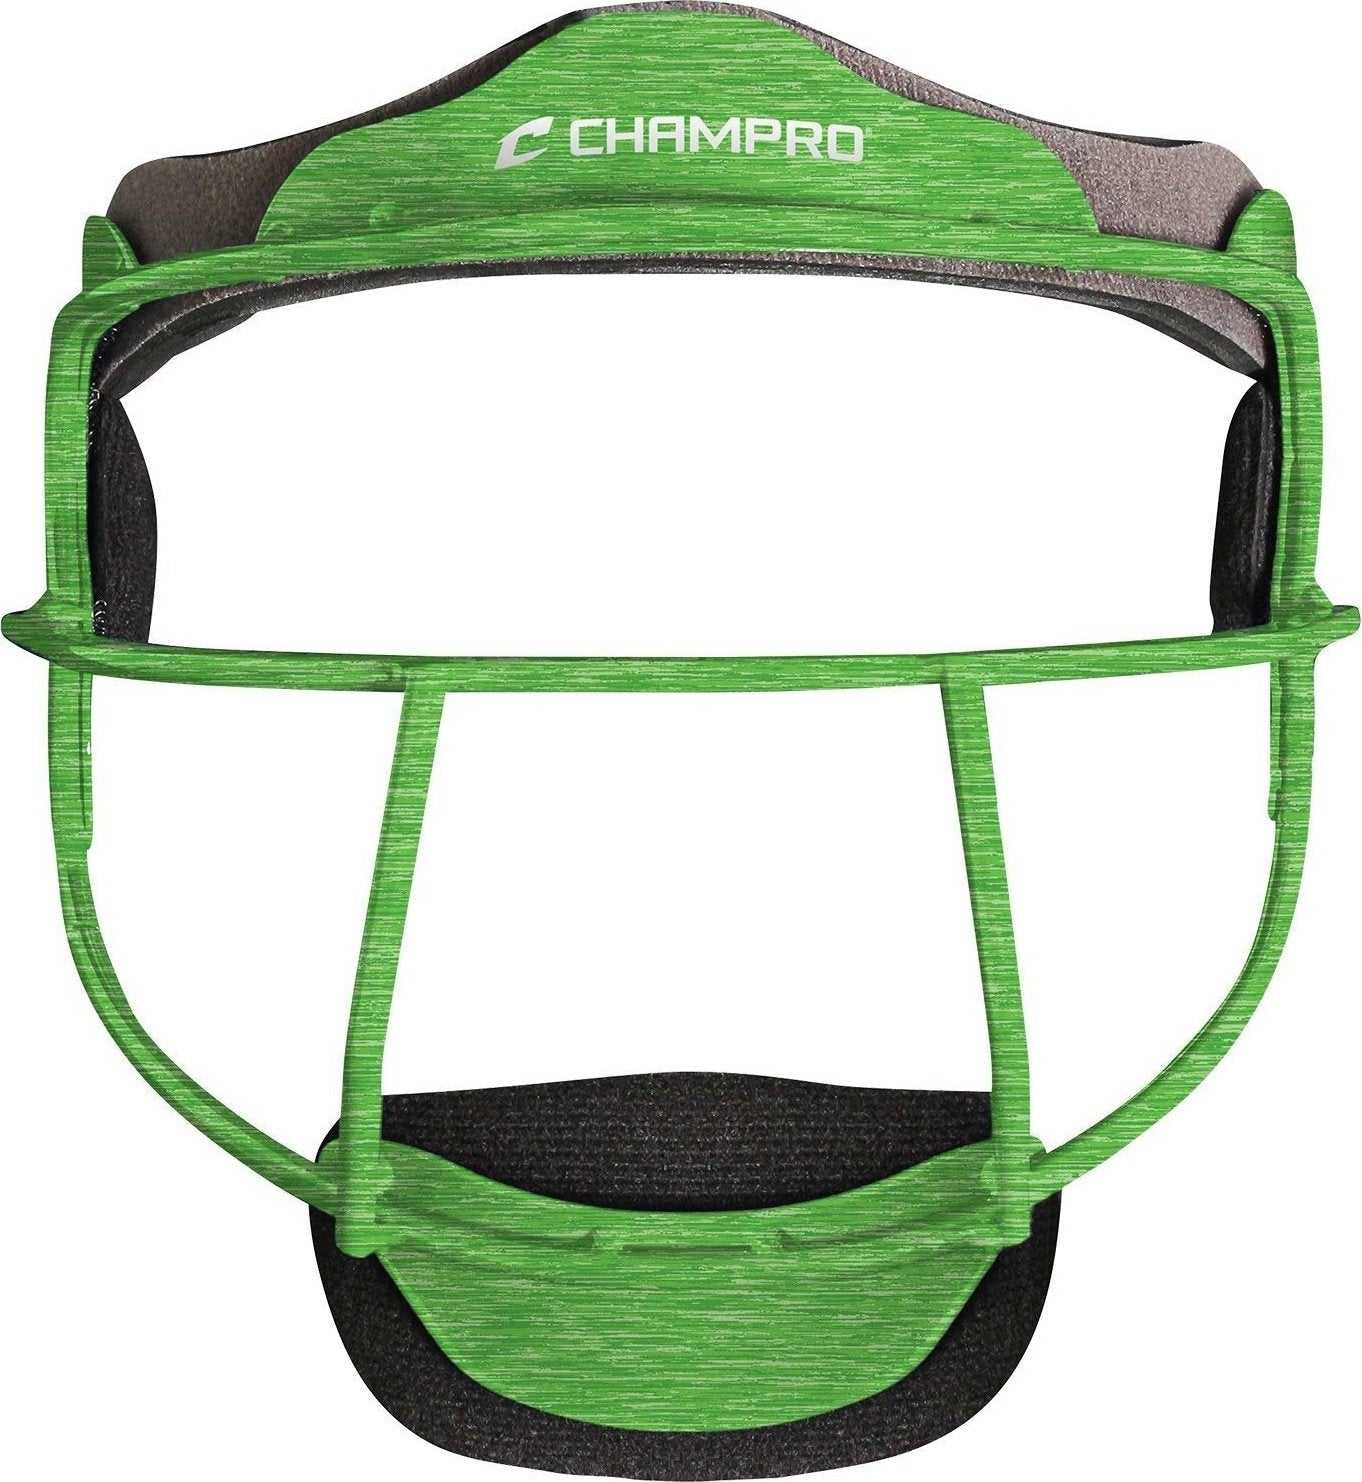 Champro CM01 The Grill Softball Fielder's Protective Covering - Lime Green - HIT a Double